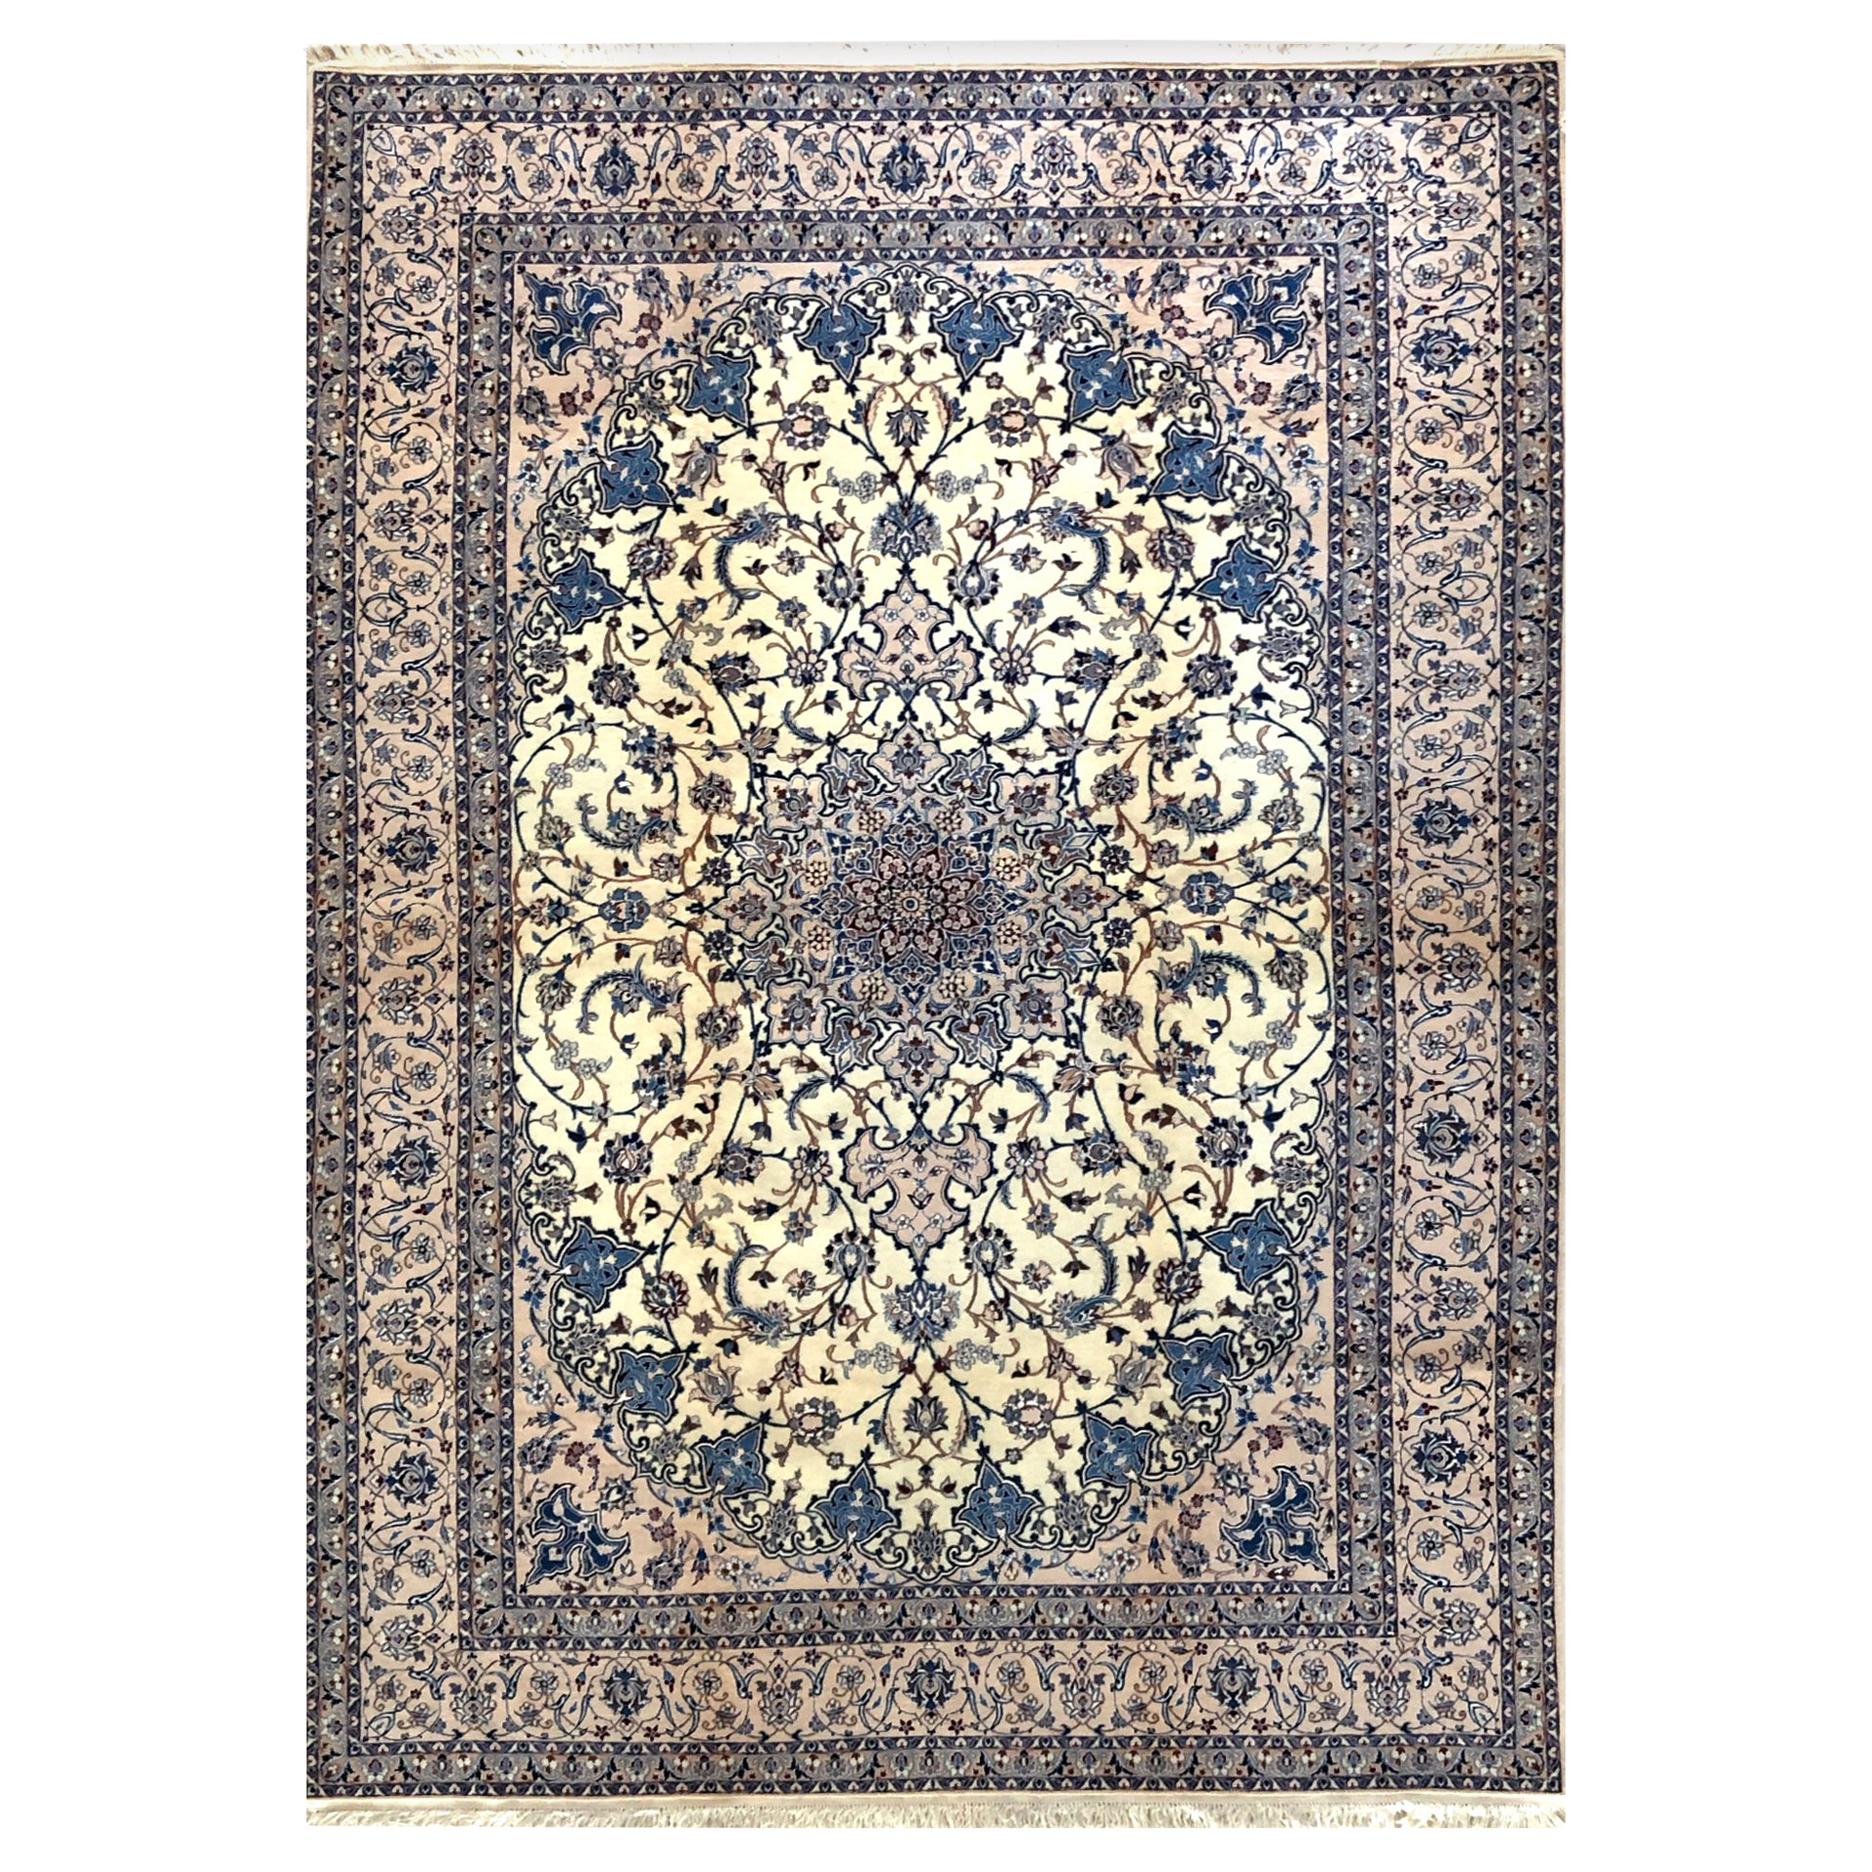 Yilong 6'x9' Persian Nain Silk Carpet Hand Knotted Oriental Floral Medallion Area Rugs 